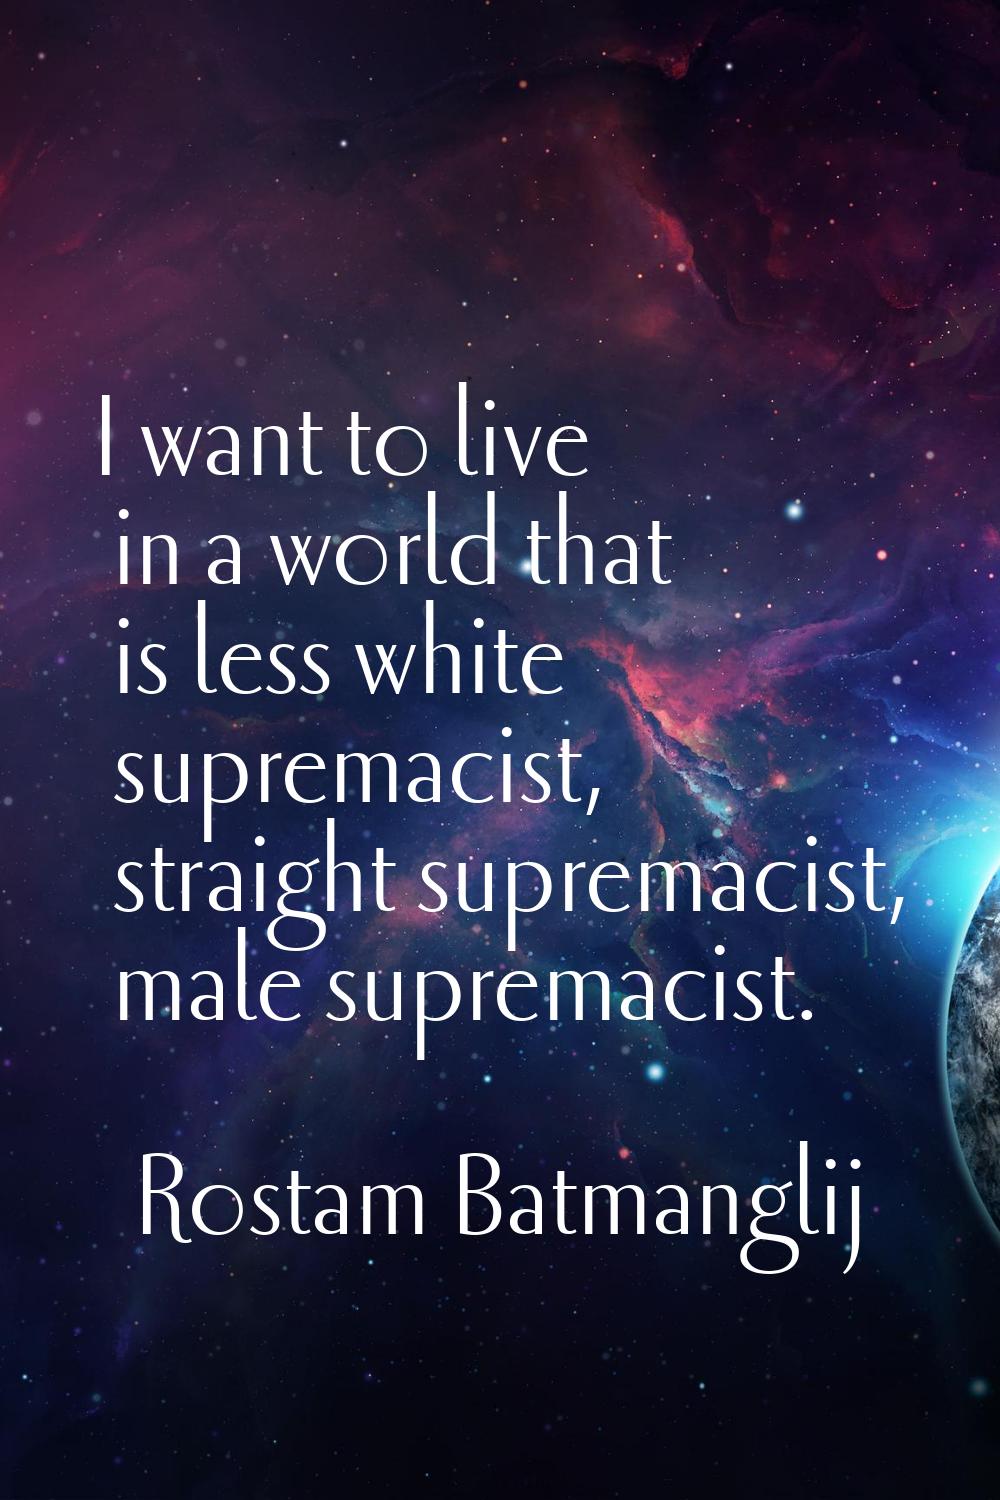 I want to live in a world that is less white supremacist, straight supremacist, male supremacist.